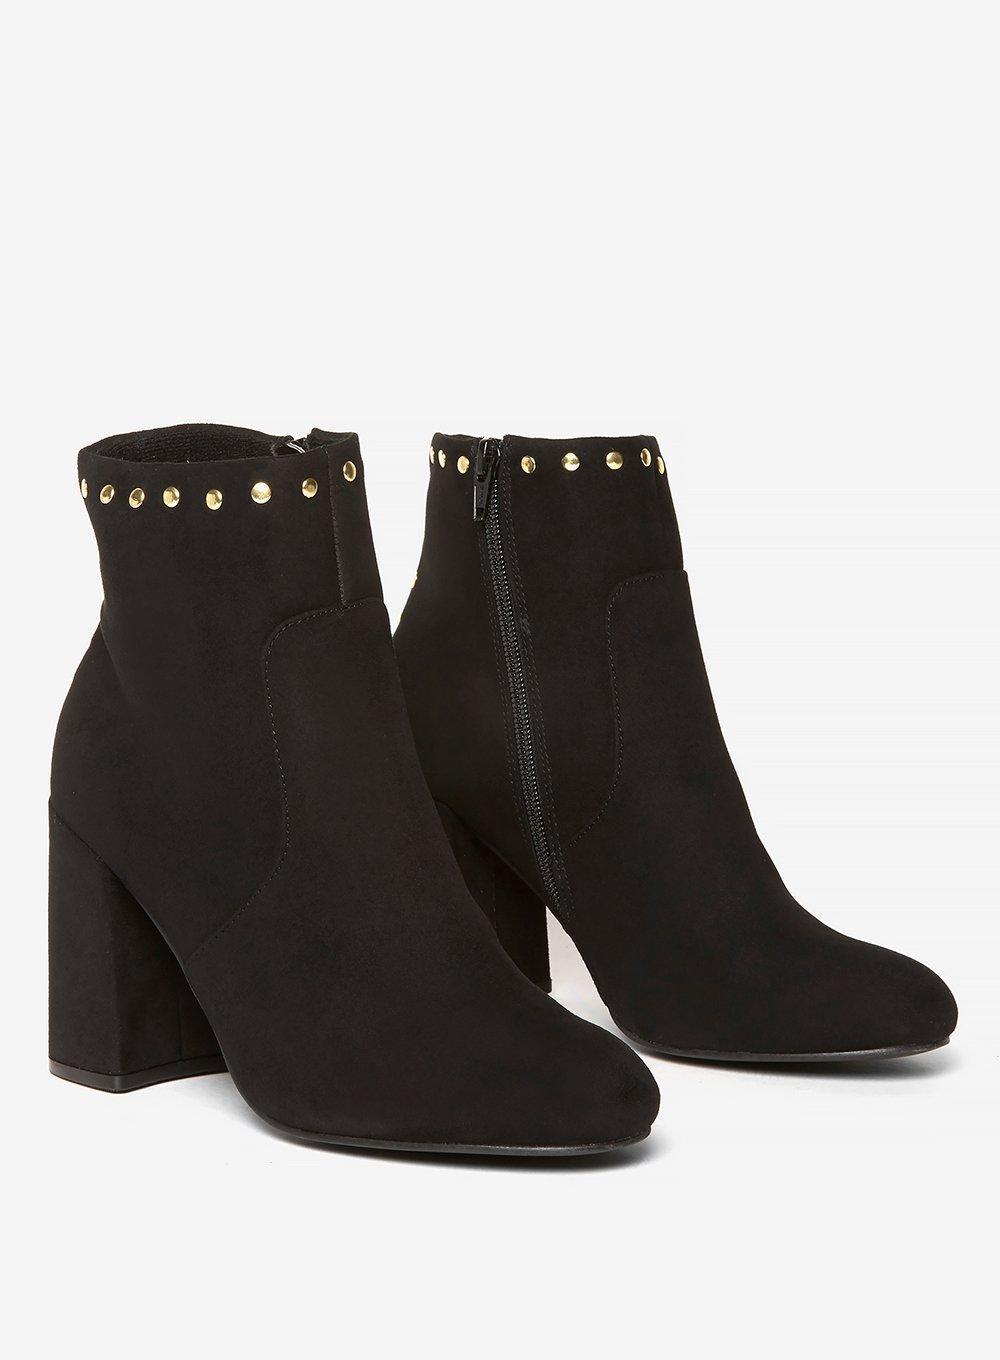 dorothy perkins black ankle boots